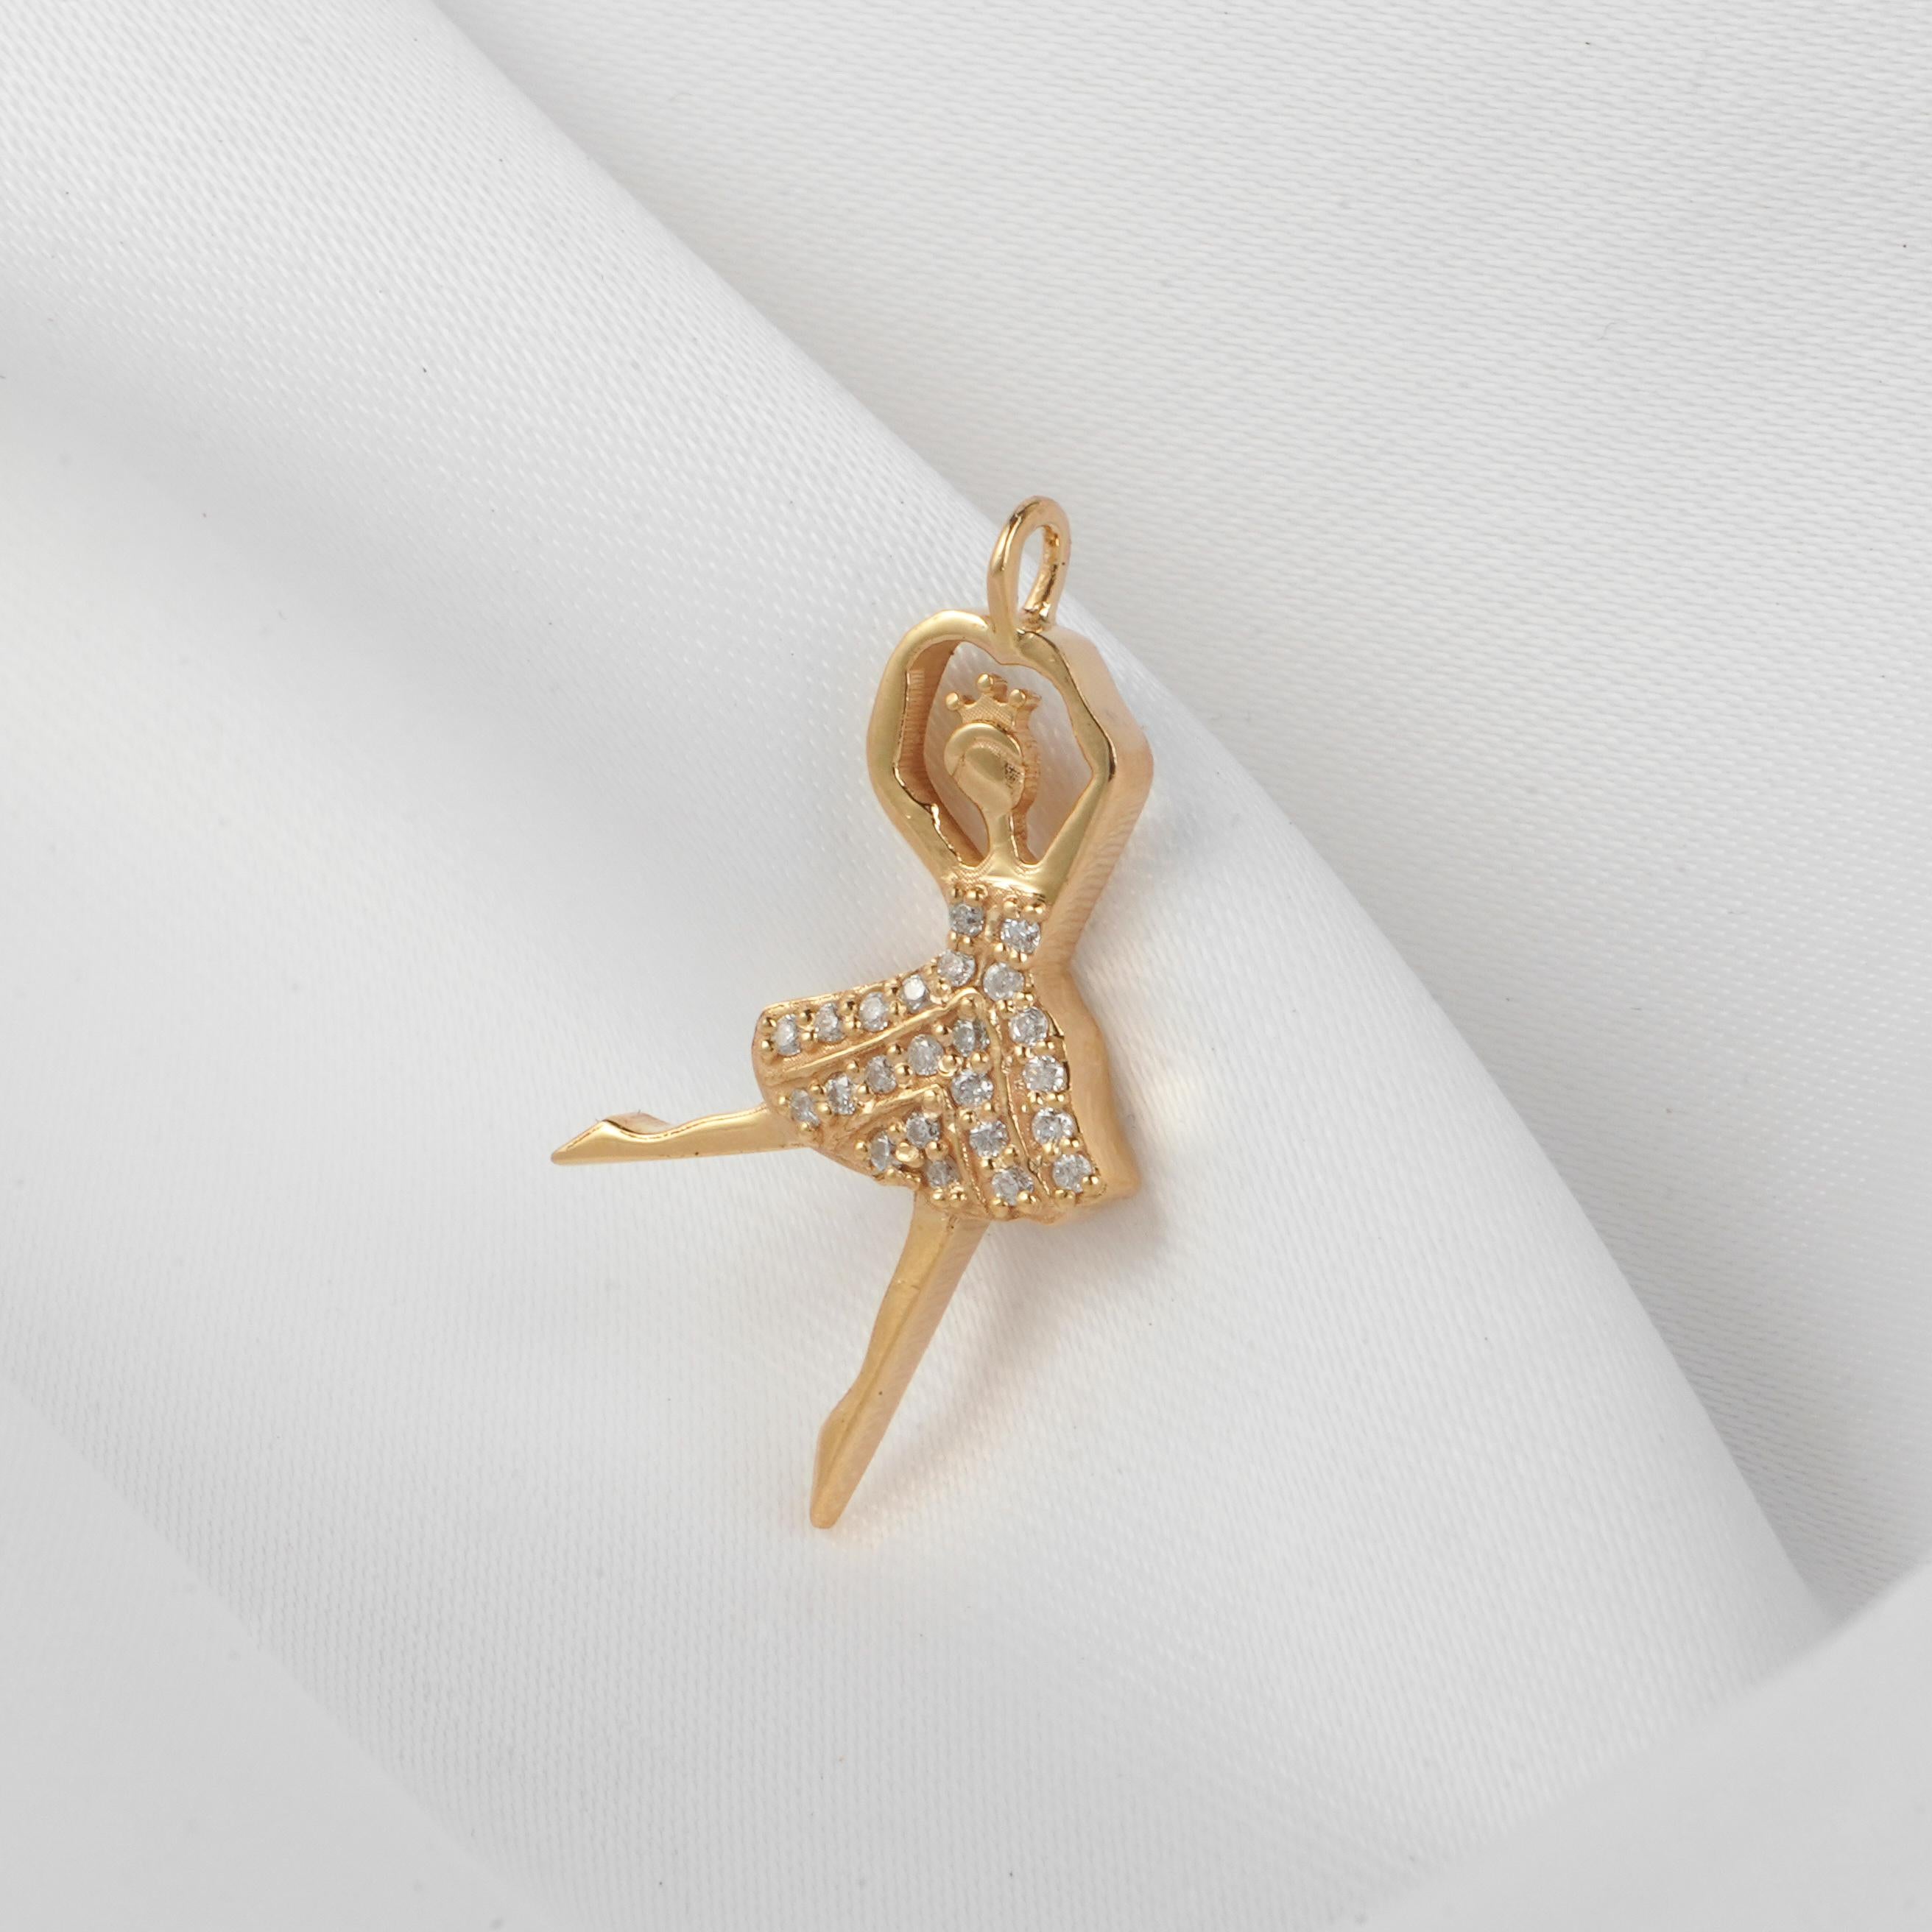 PRODUCT DETAILS:
18k Solid Gold
Stones:
Brilliant cut Moissanite 0.1 c.t (approx)
Made entirely by hand using ethically sourced stones and reclaimed metals that have been melted down and given new life.
